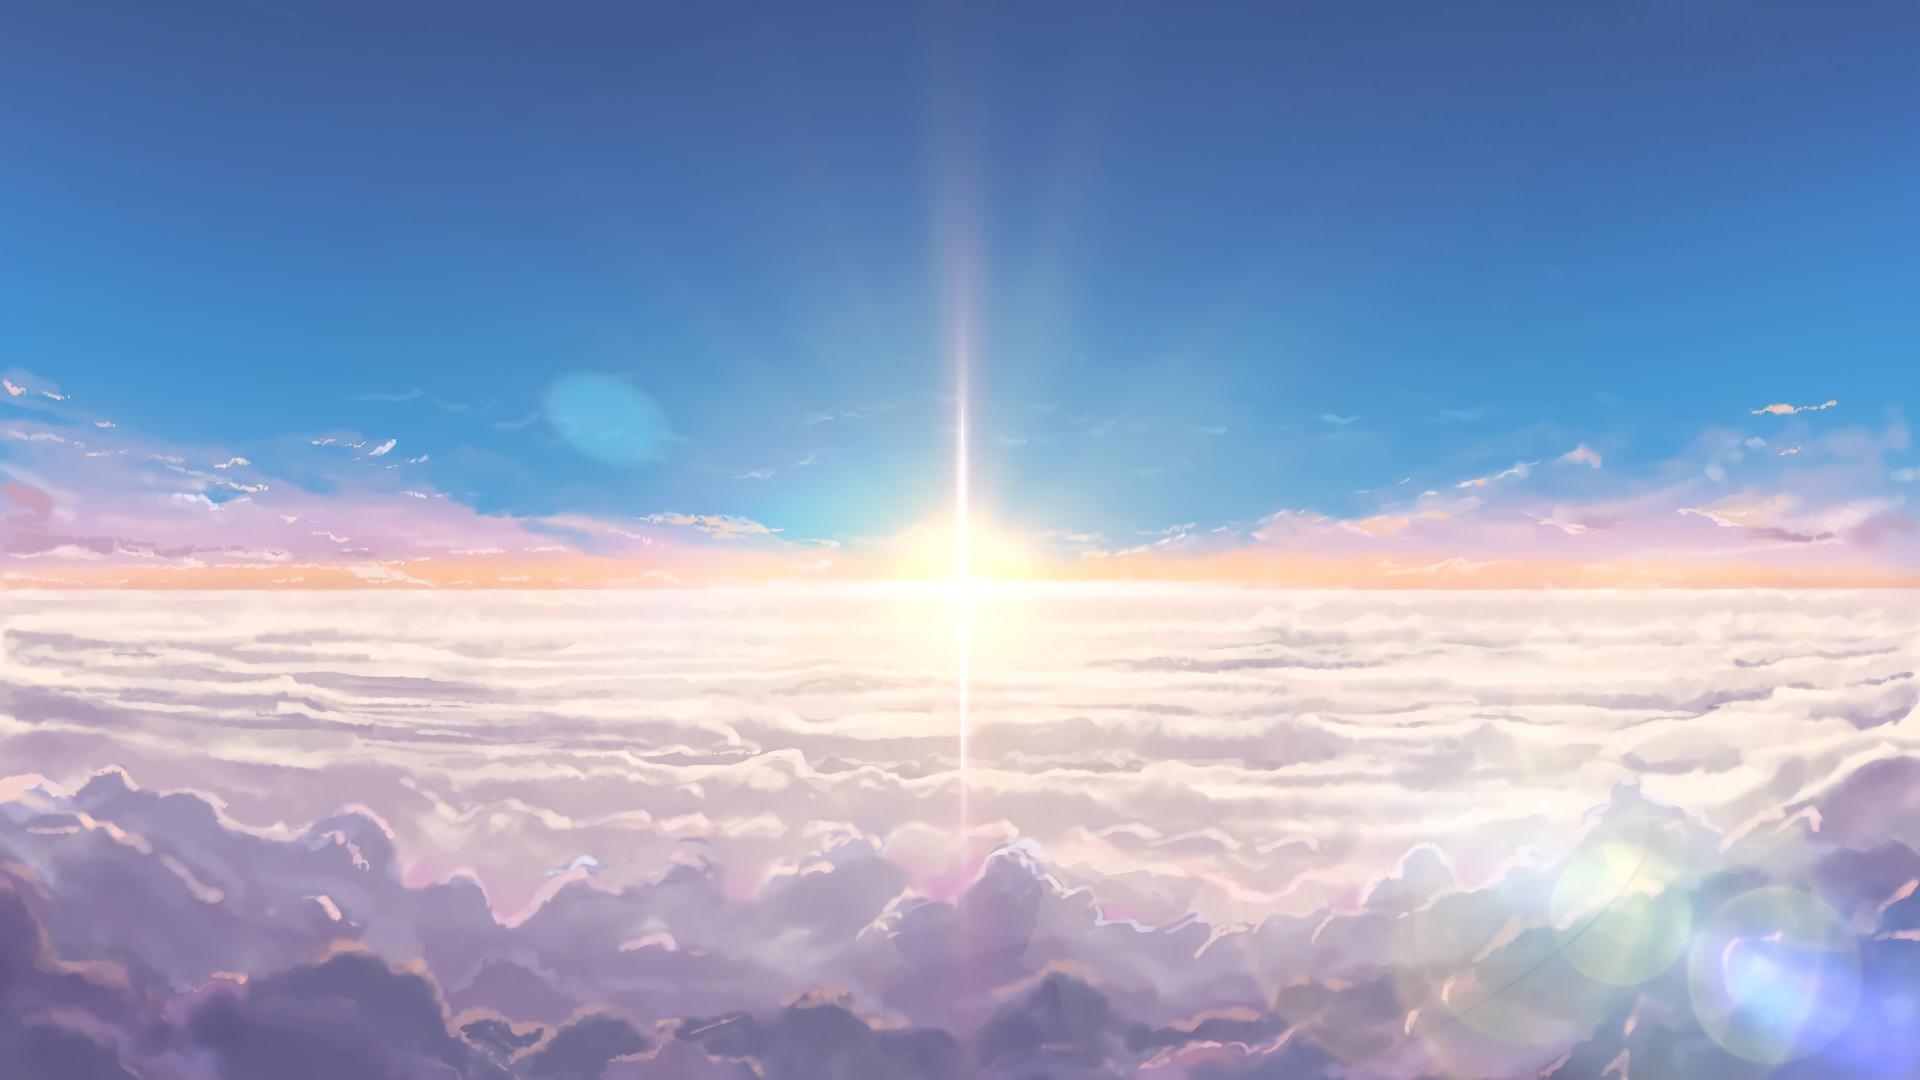 Anime Clouds Wallpaper Free Anime Clouds Background